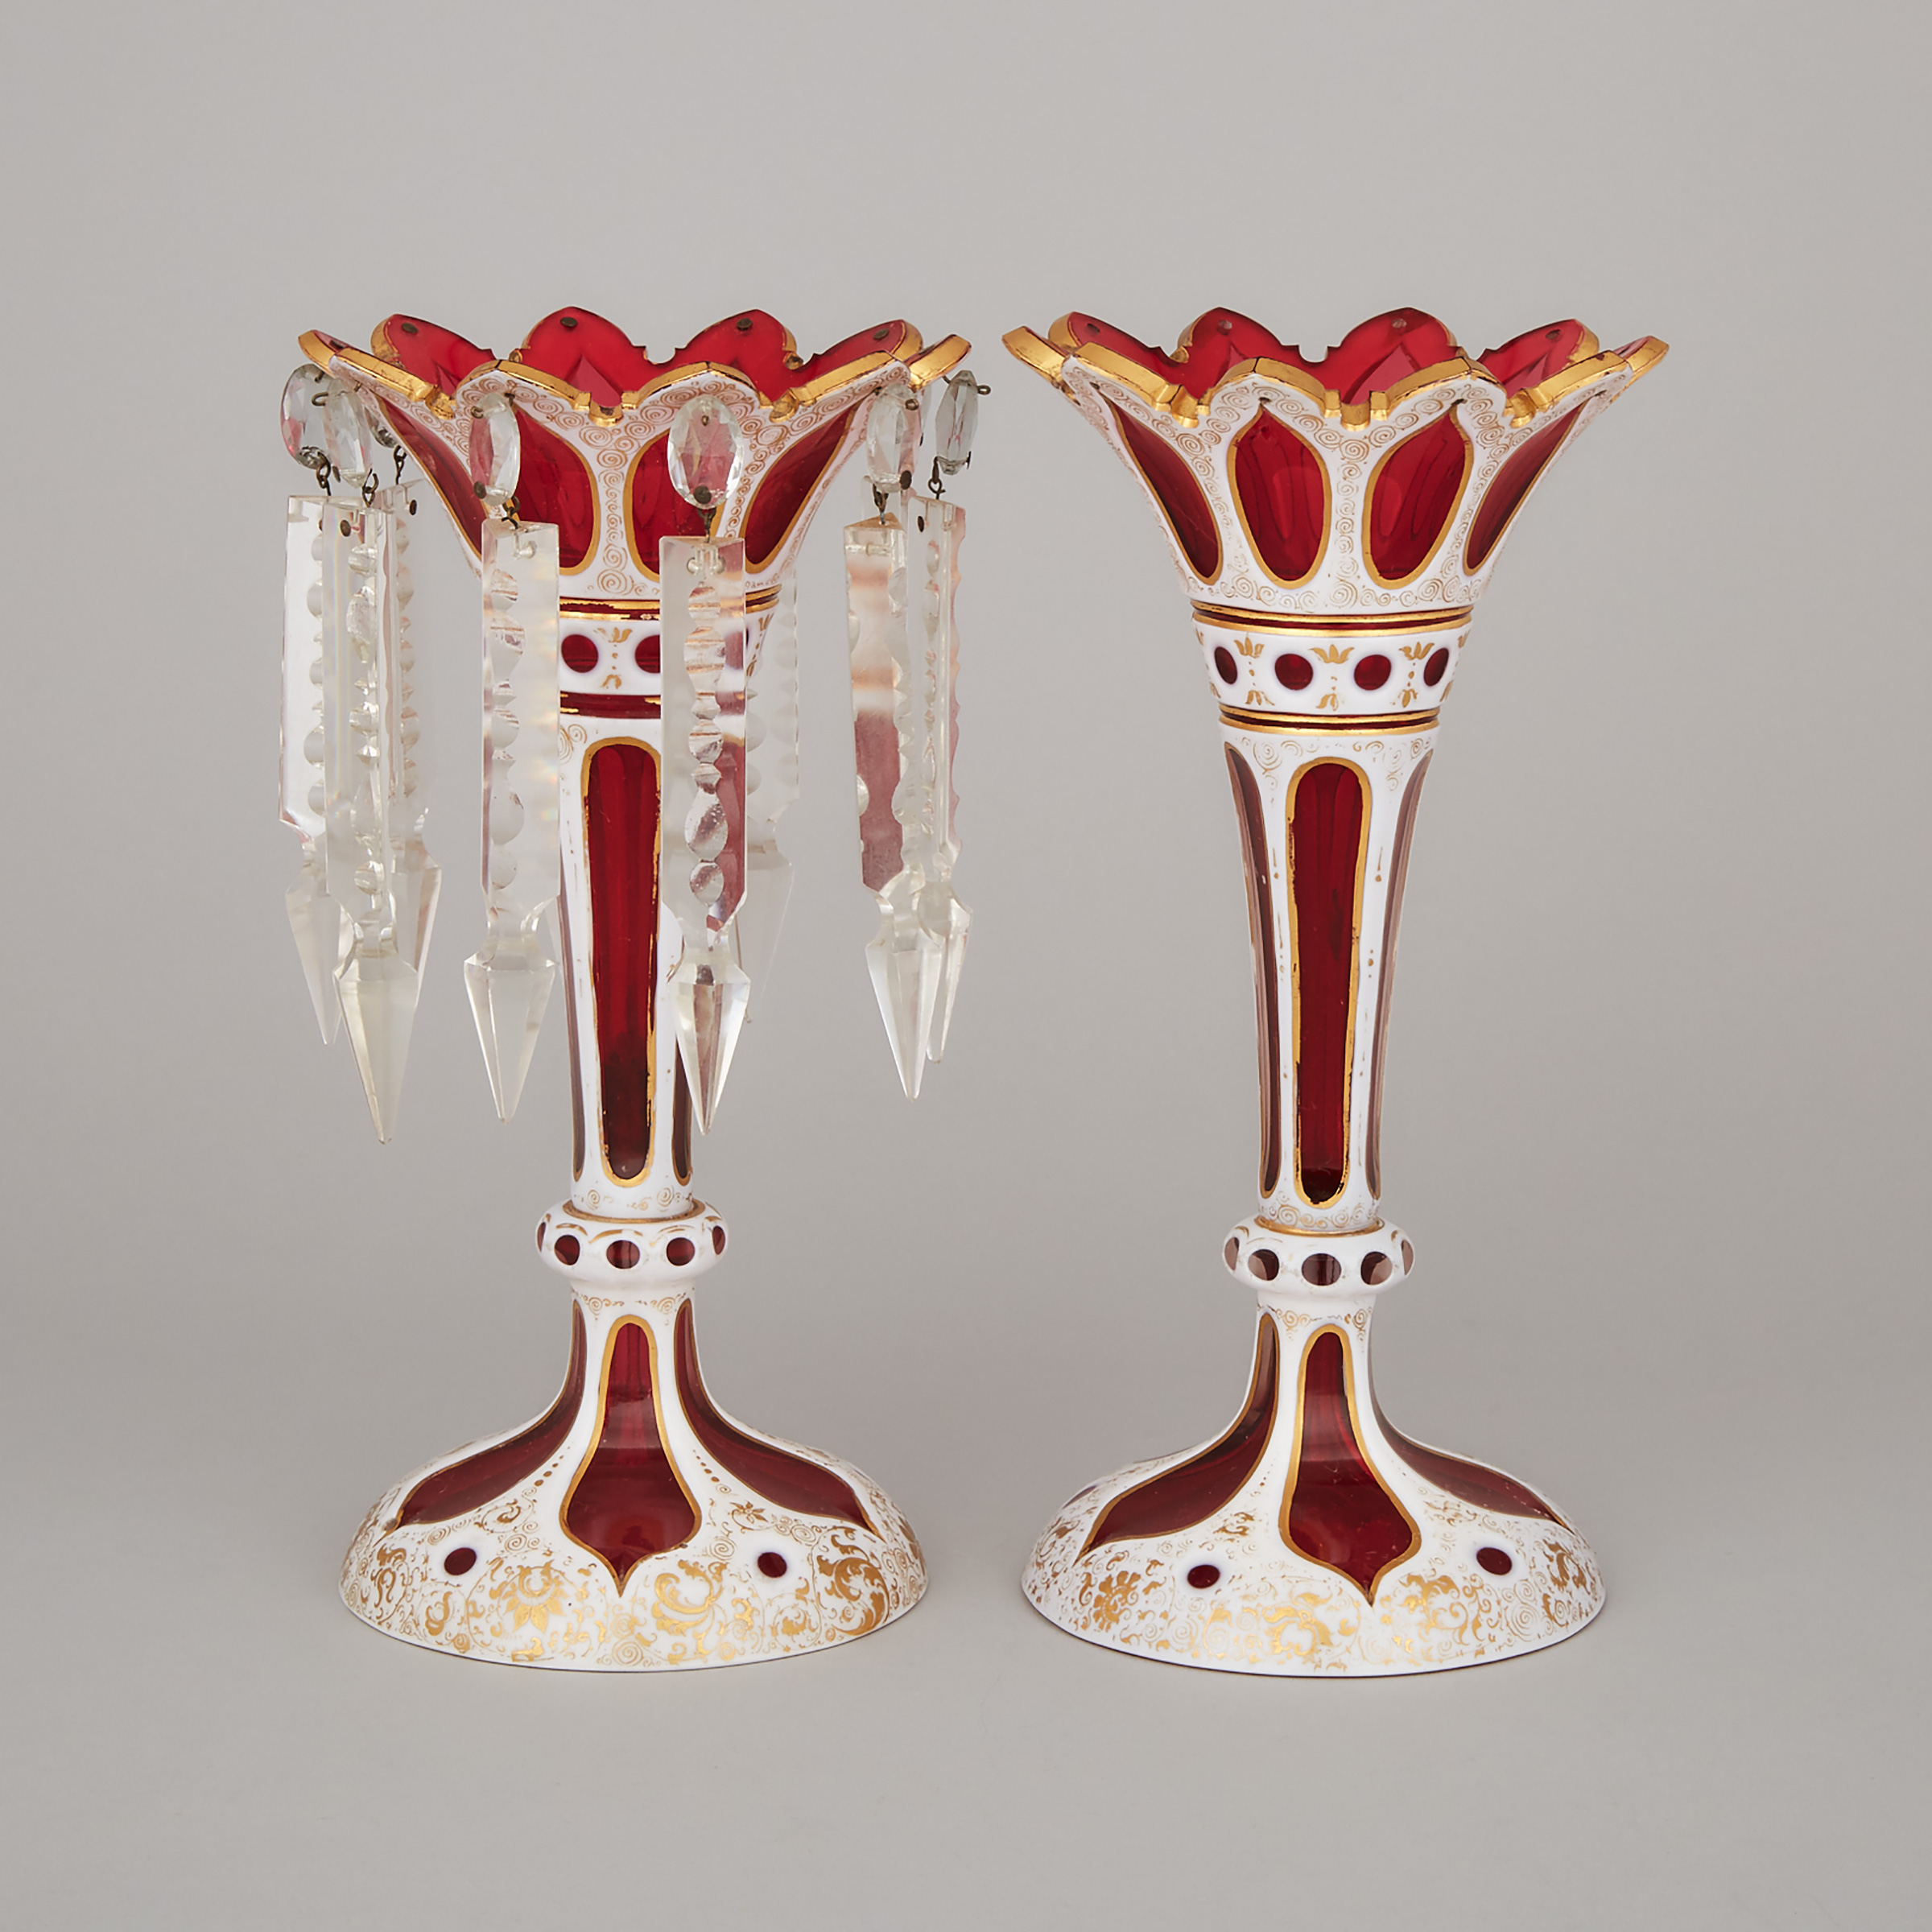 Pair of Bohemian Overlaid and Gilt Red Glass Vase Lustres, late 19th century